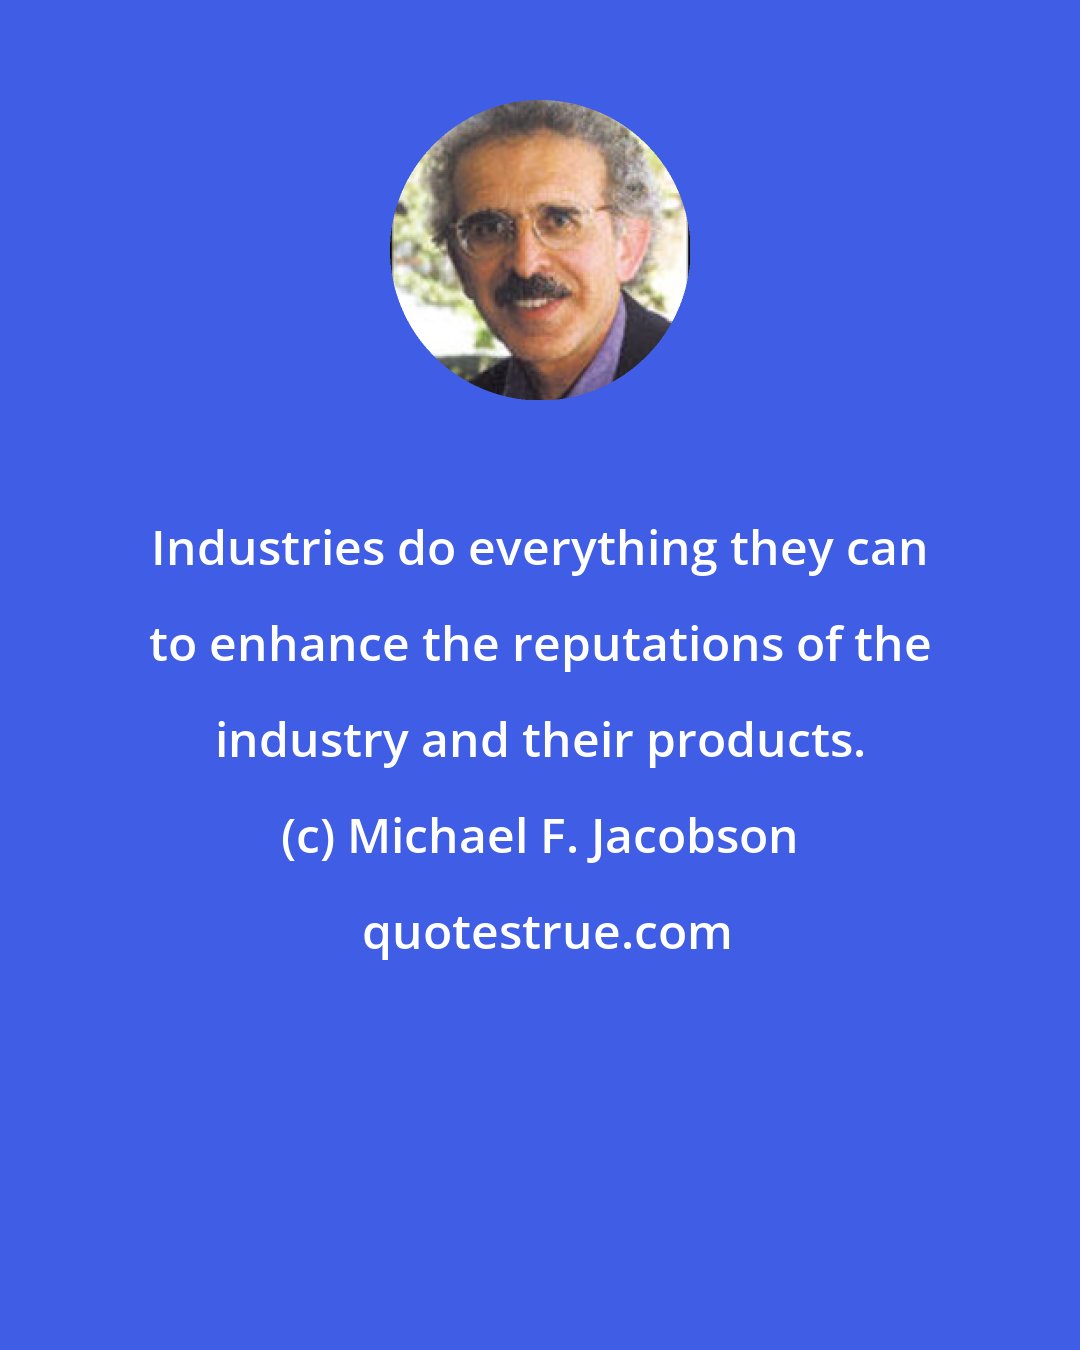 Michael F. Jacobson: Industries do everything they can to enhance the reputations of the industry and their products.